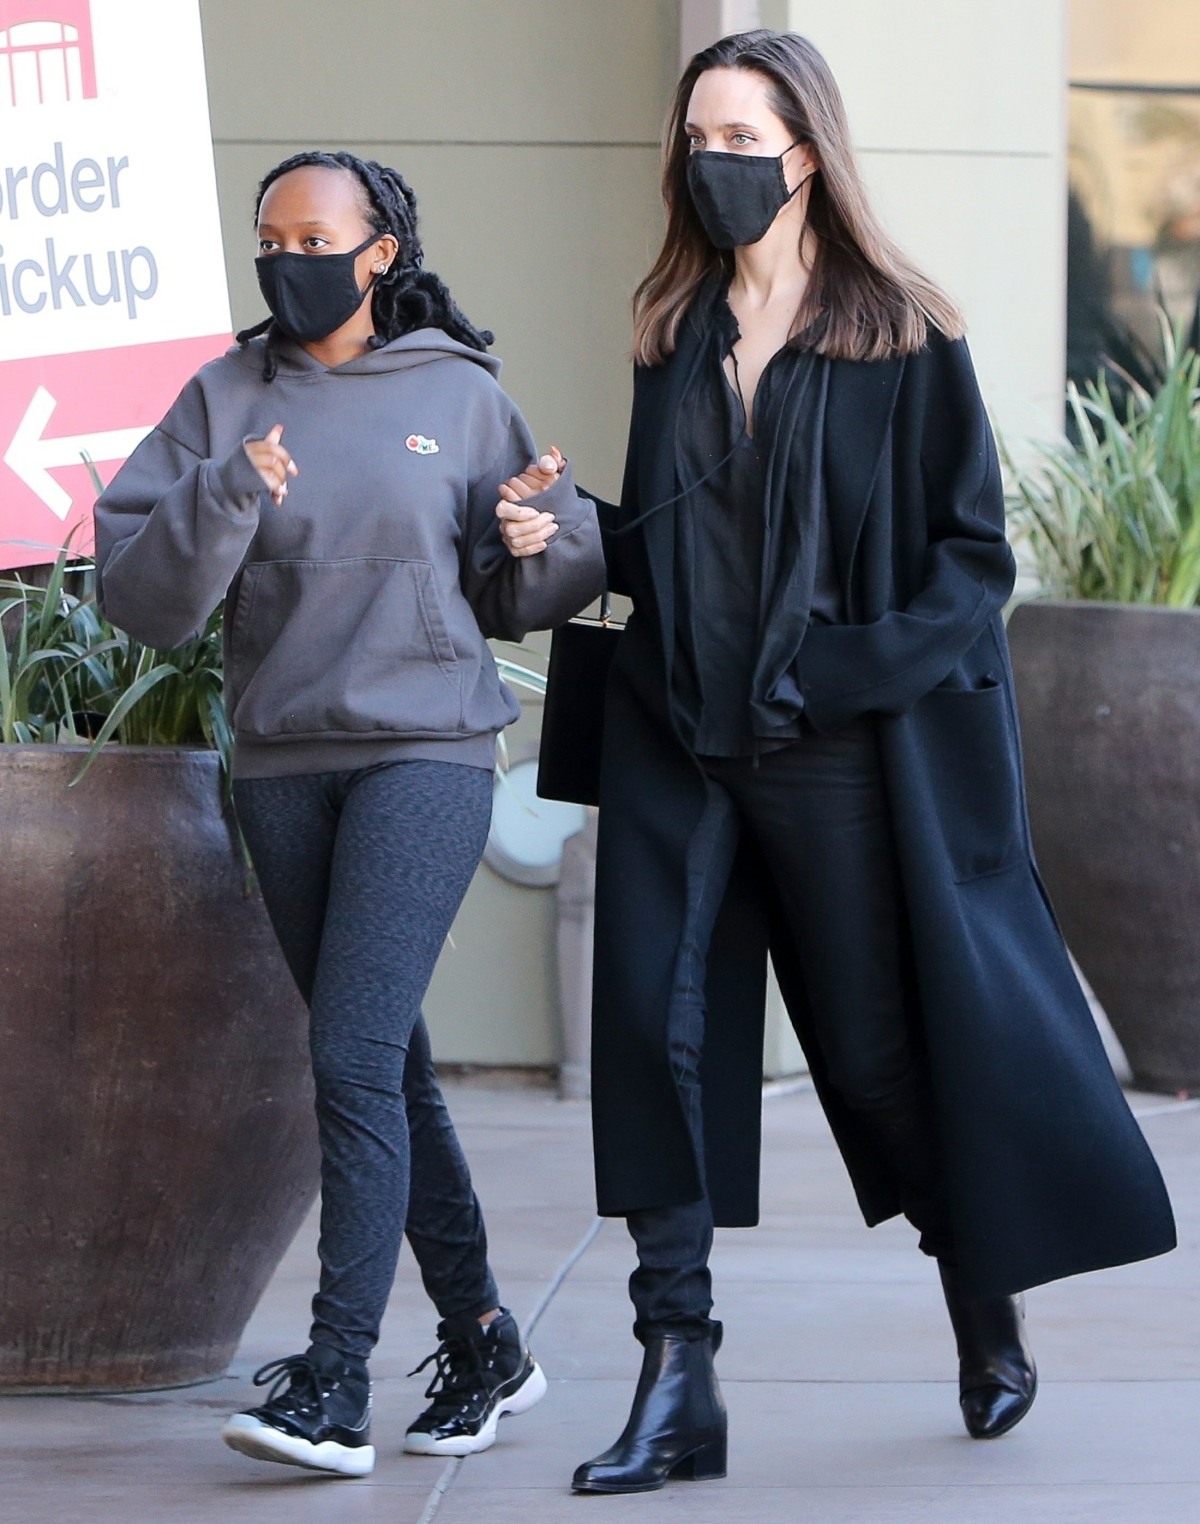 Angelina Jolie holds hands with her daughter Zahara while out shopping